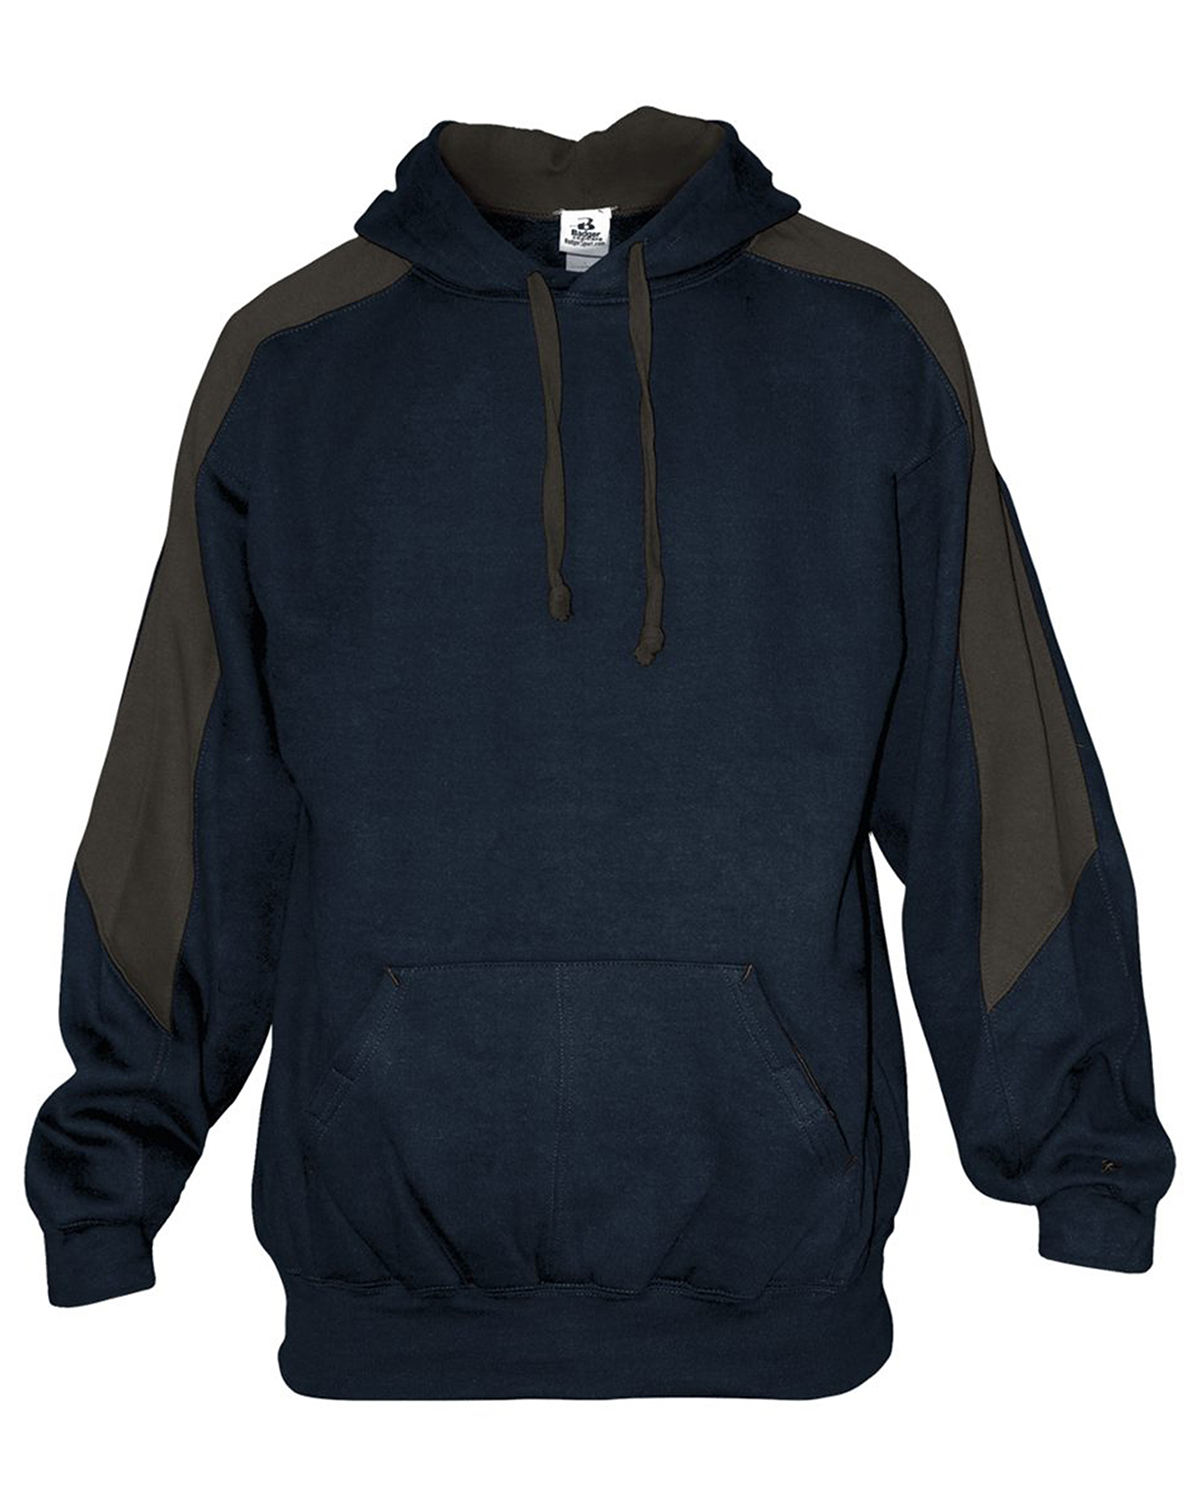 click to view NAVY/ CHARCOAL